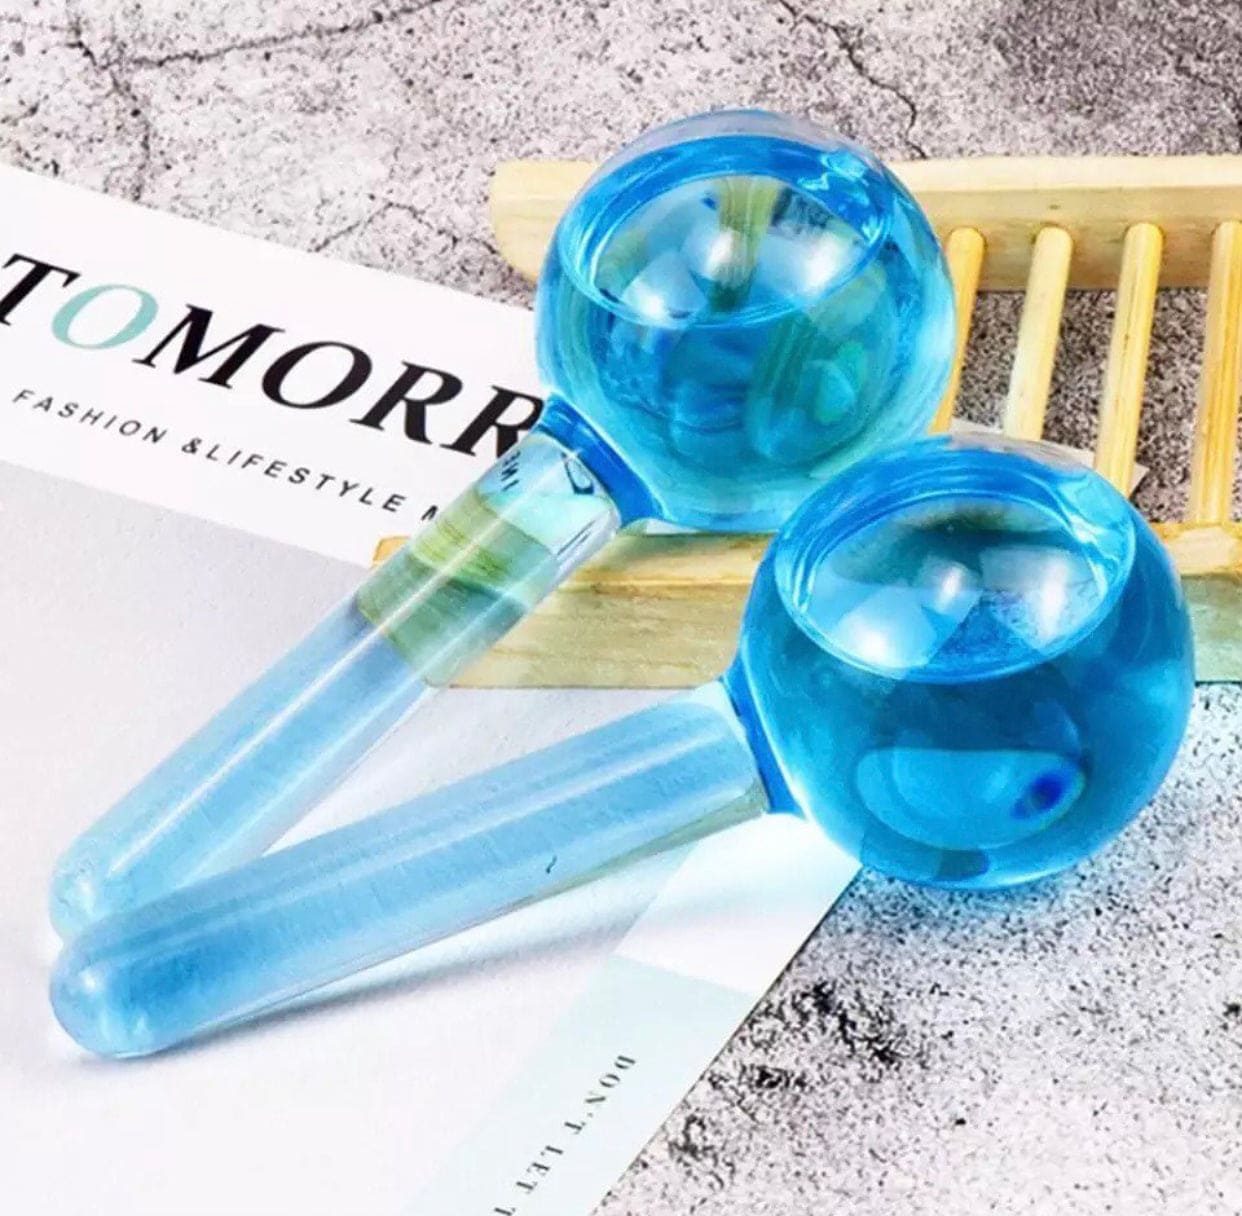 Crystal Ice Hockey, Energy Face Eye Massaging Globes, Face Lifting Anti Wrinkles Ice Roller, Anti Aging Health And Skincare Tool